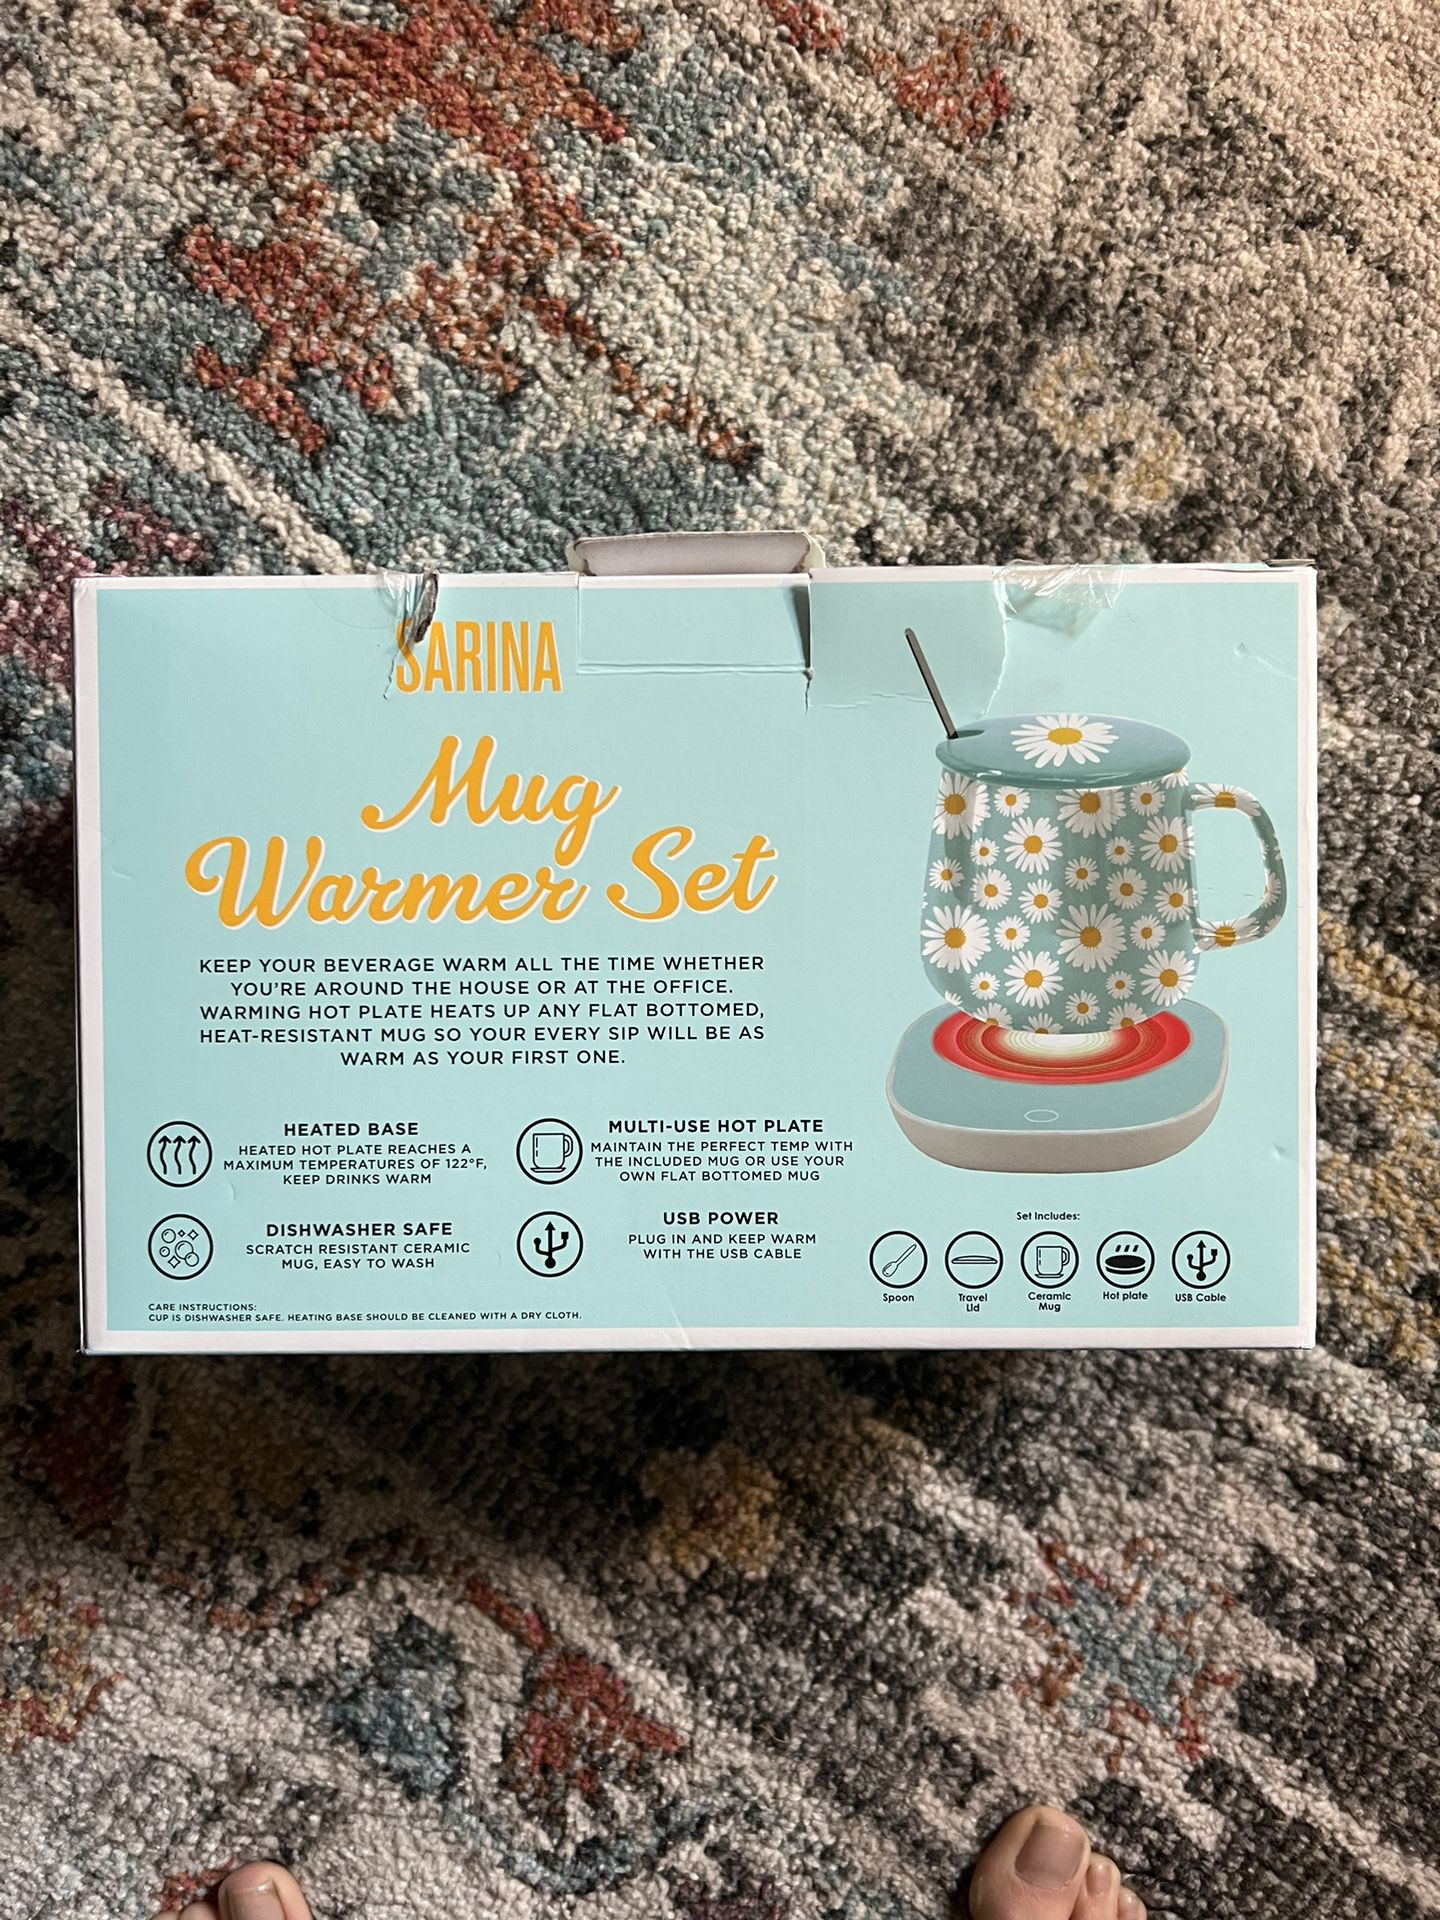 Coffee Warmer And Mug for Sale in Los Rnchs Abq, NM - OfferUp